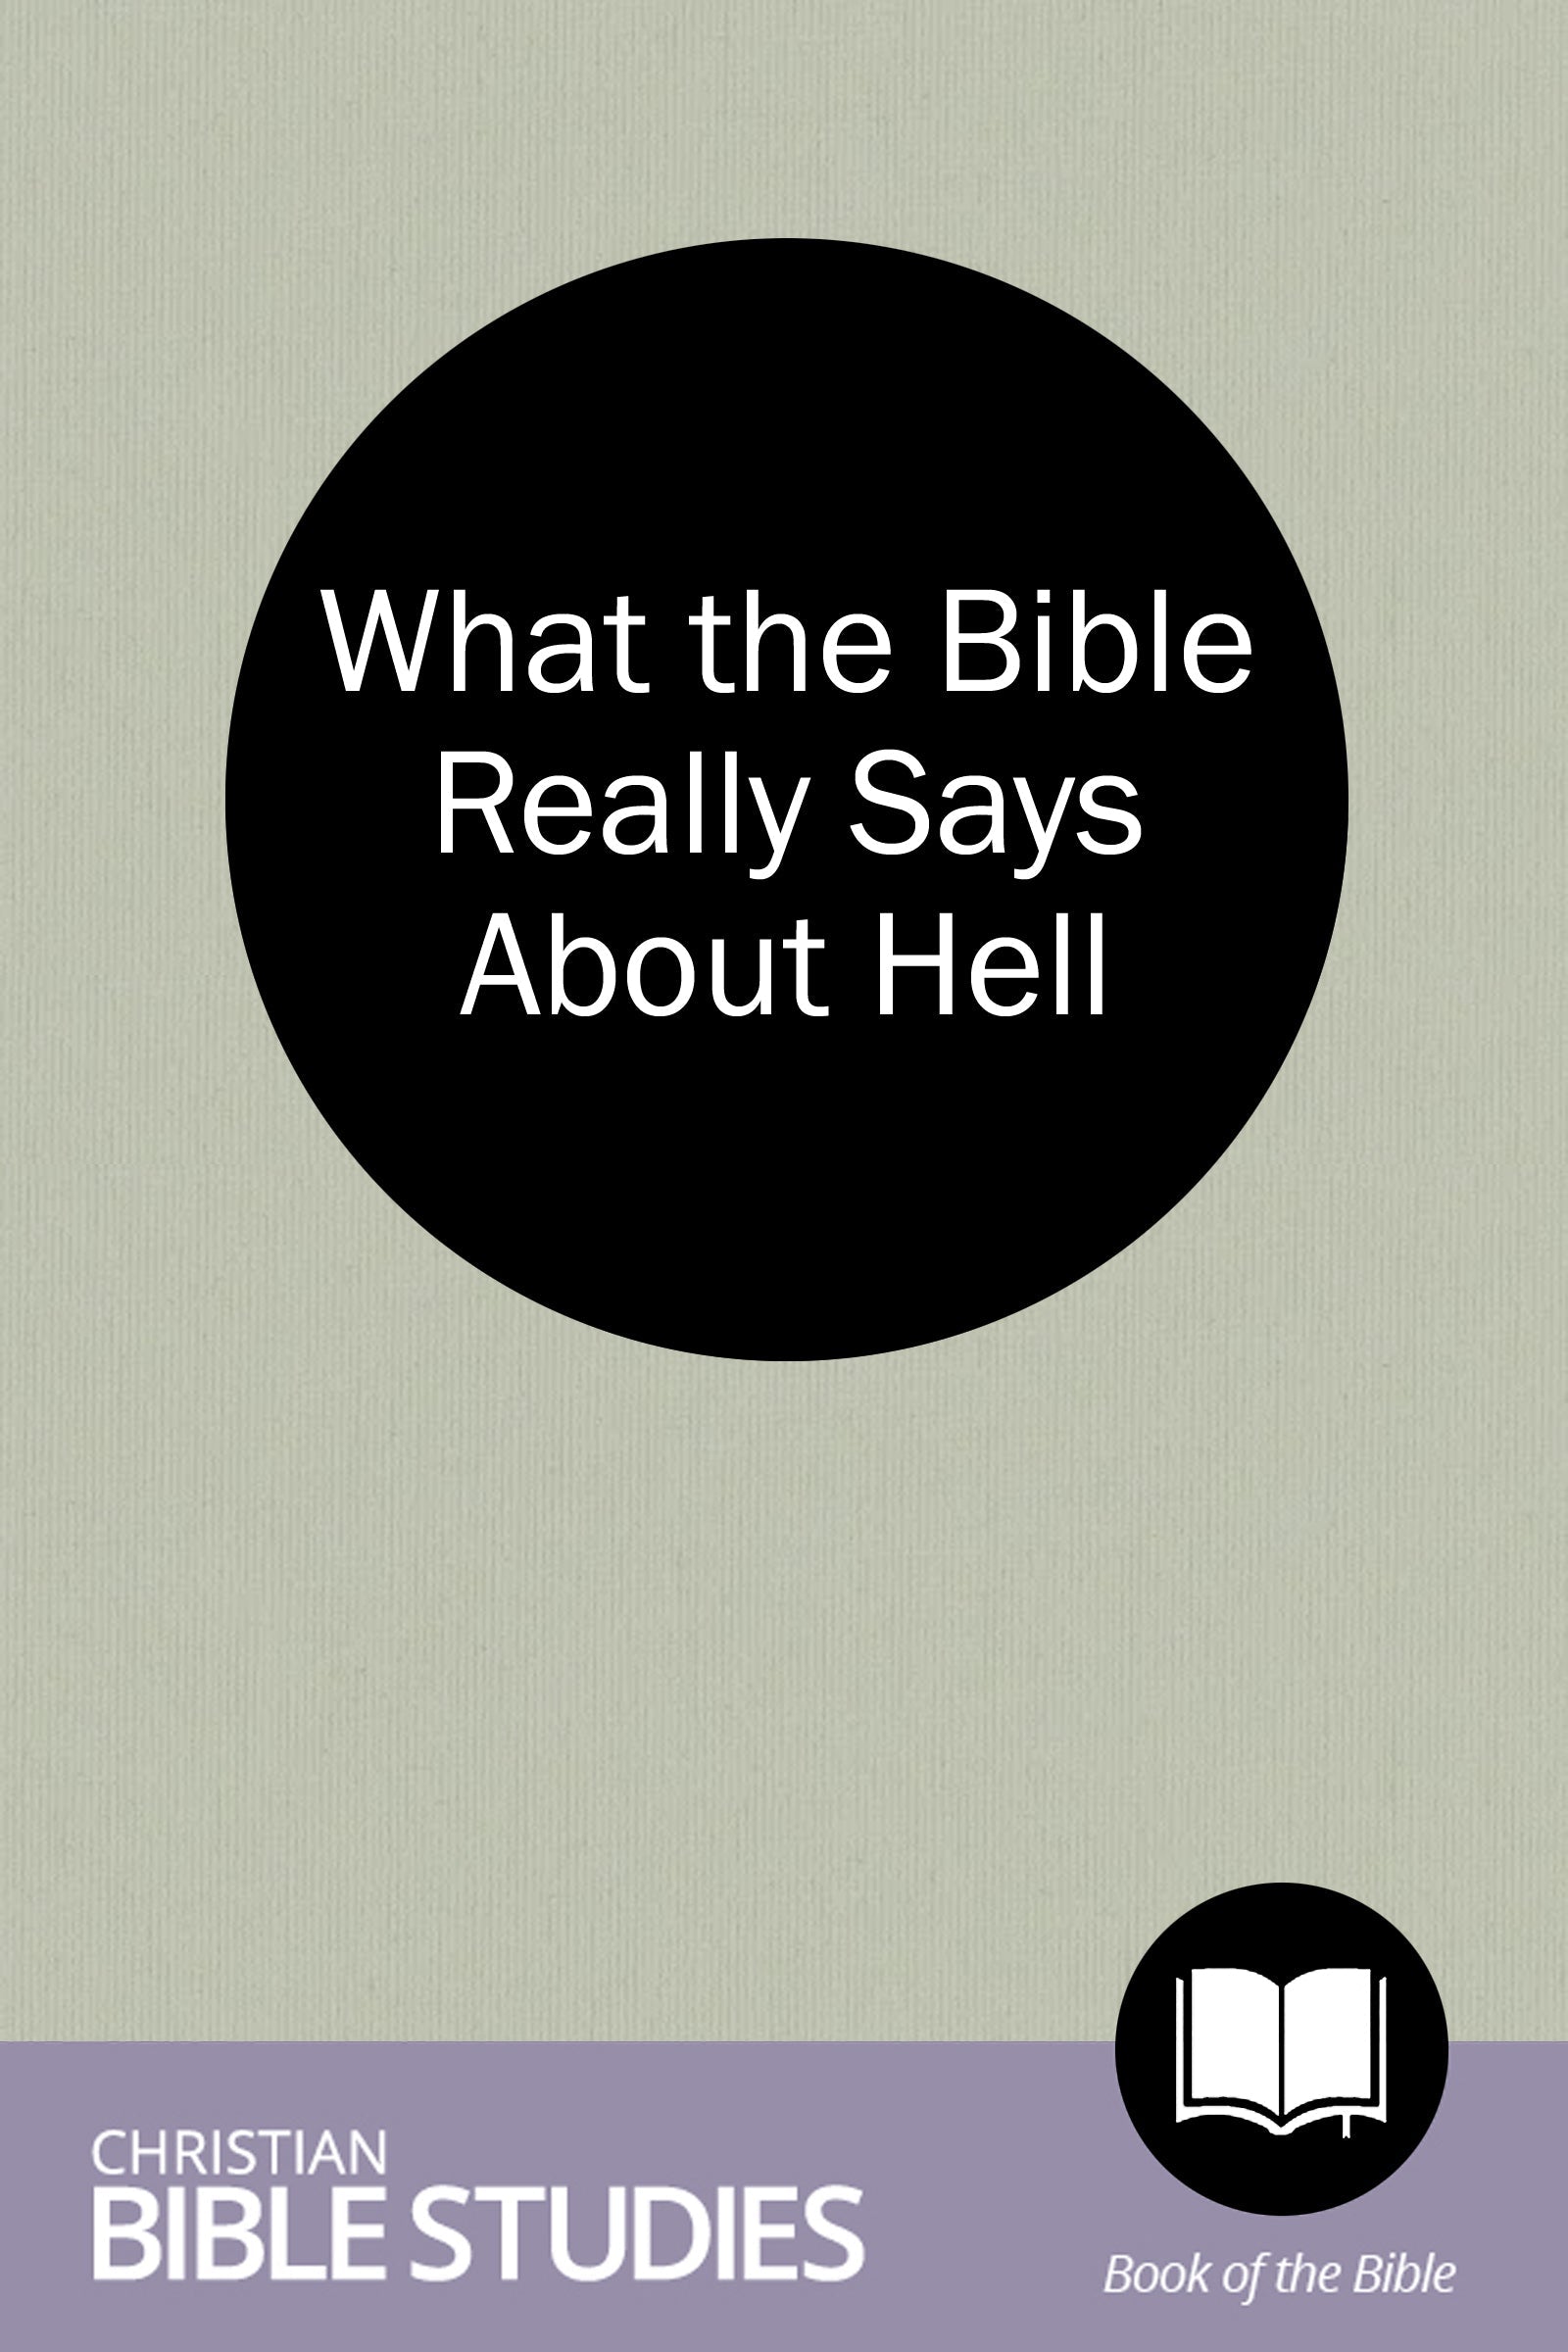 What the Bible Really Says About Hell